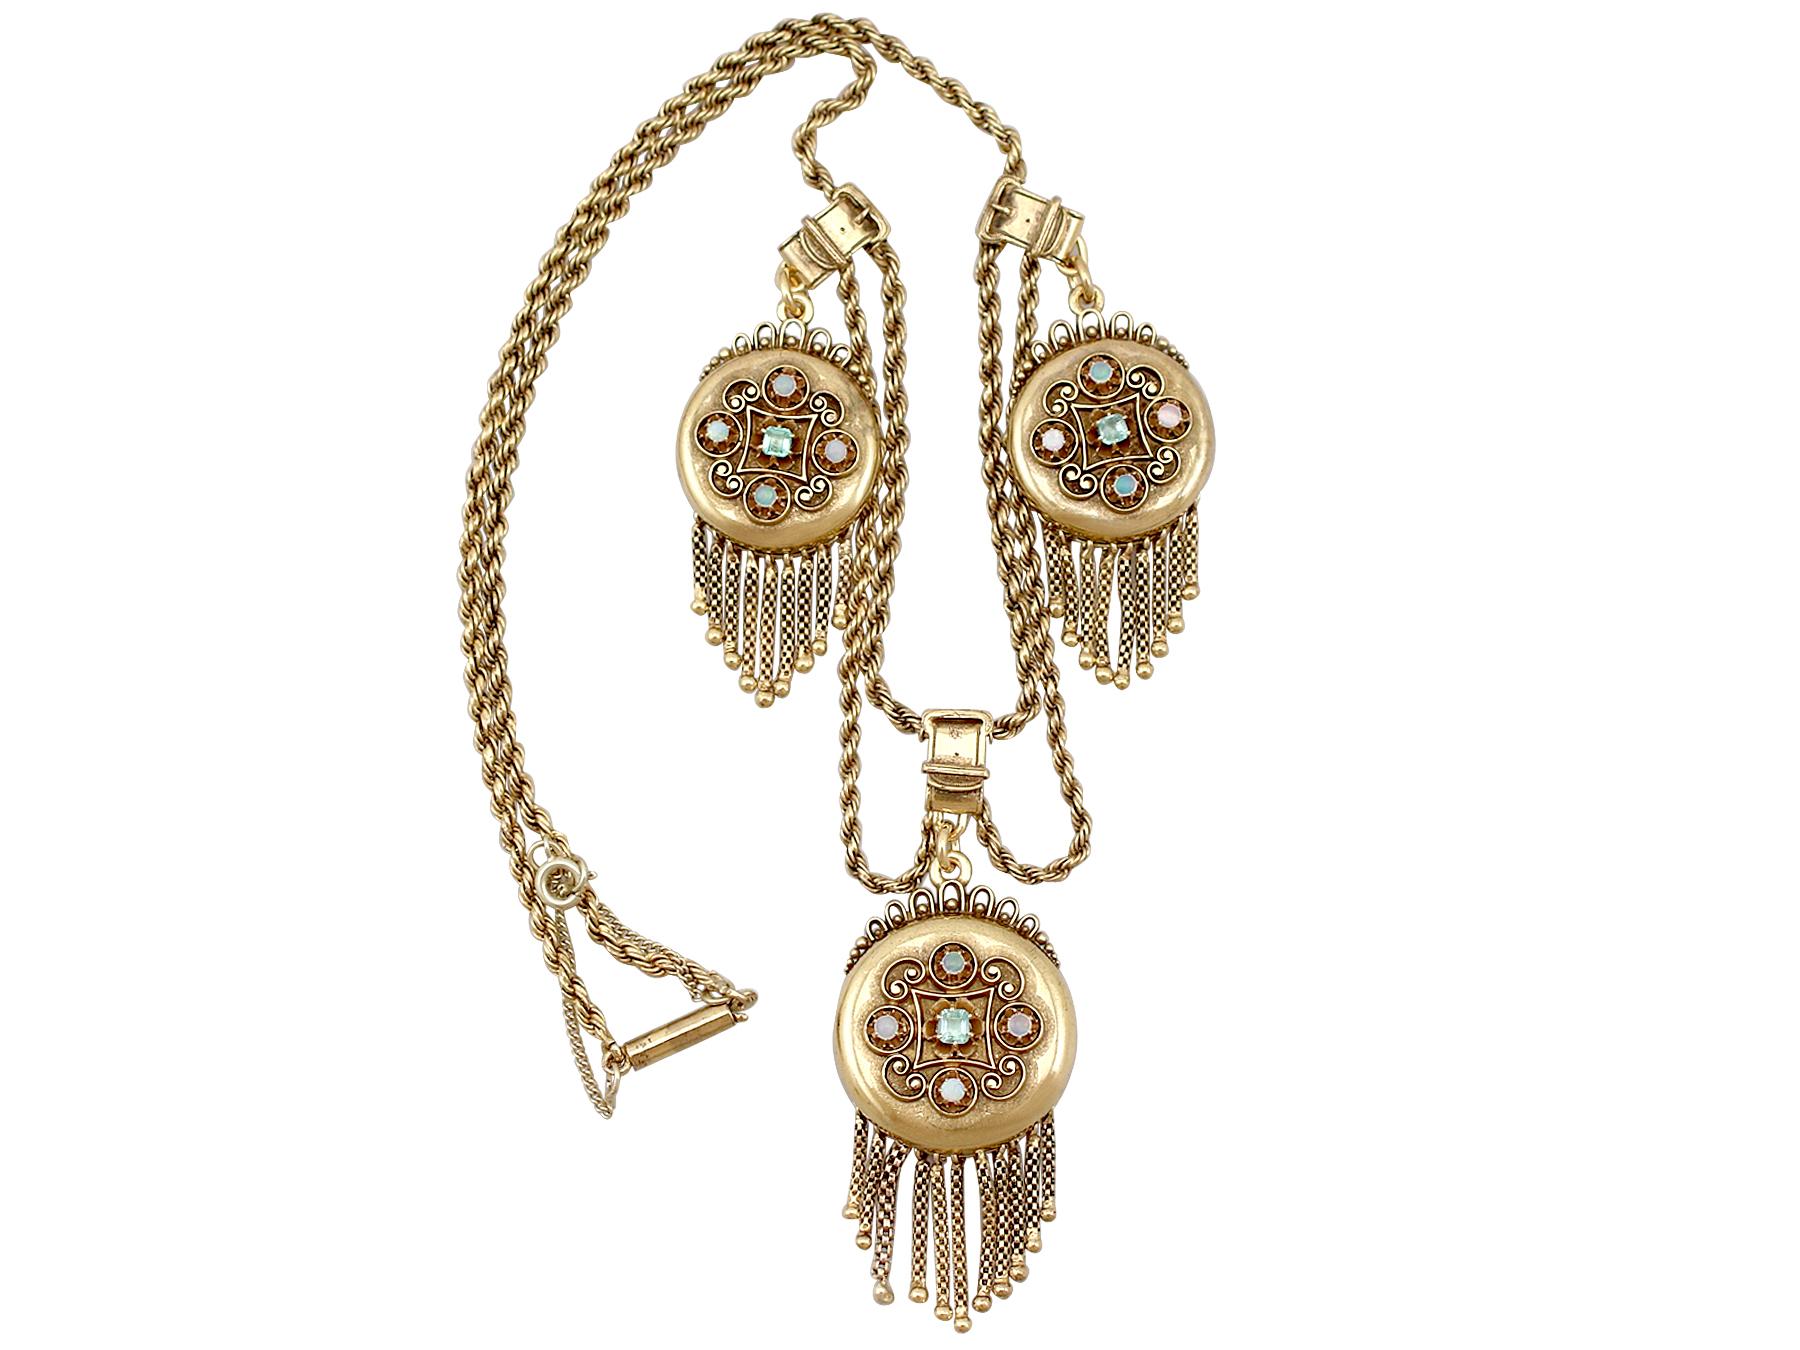 This exceptional, fine and impressive antique Victorian three locket necklace has been crafted in 15k yellow gold.

The three lockets/pendants have circular, cushion style designs accented with applied geometric decoration to each anterior